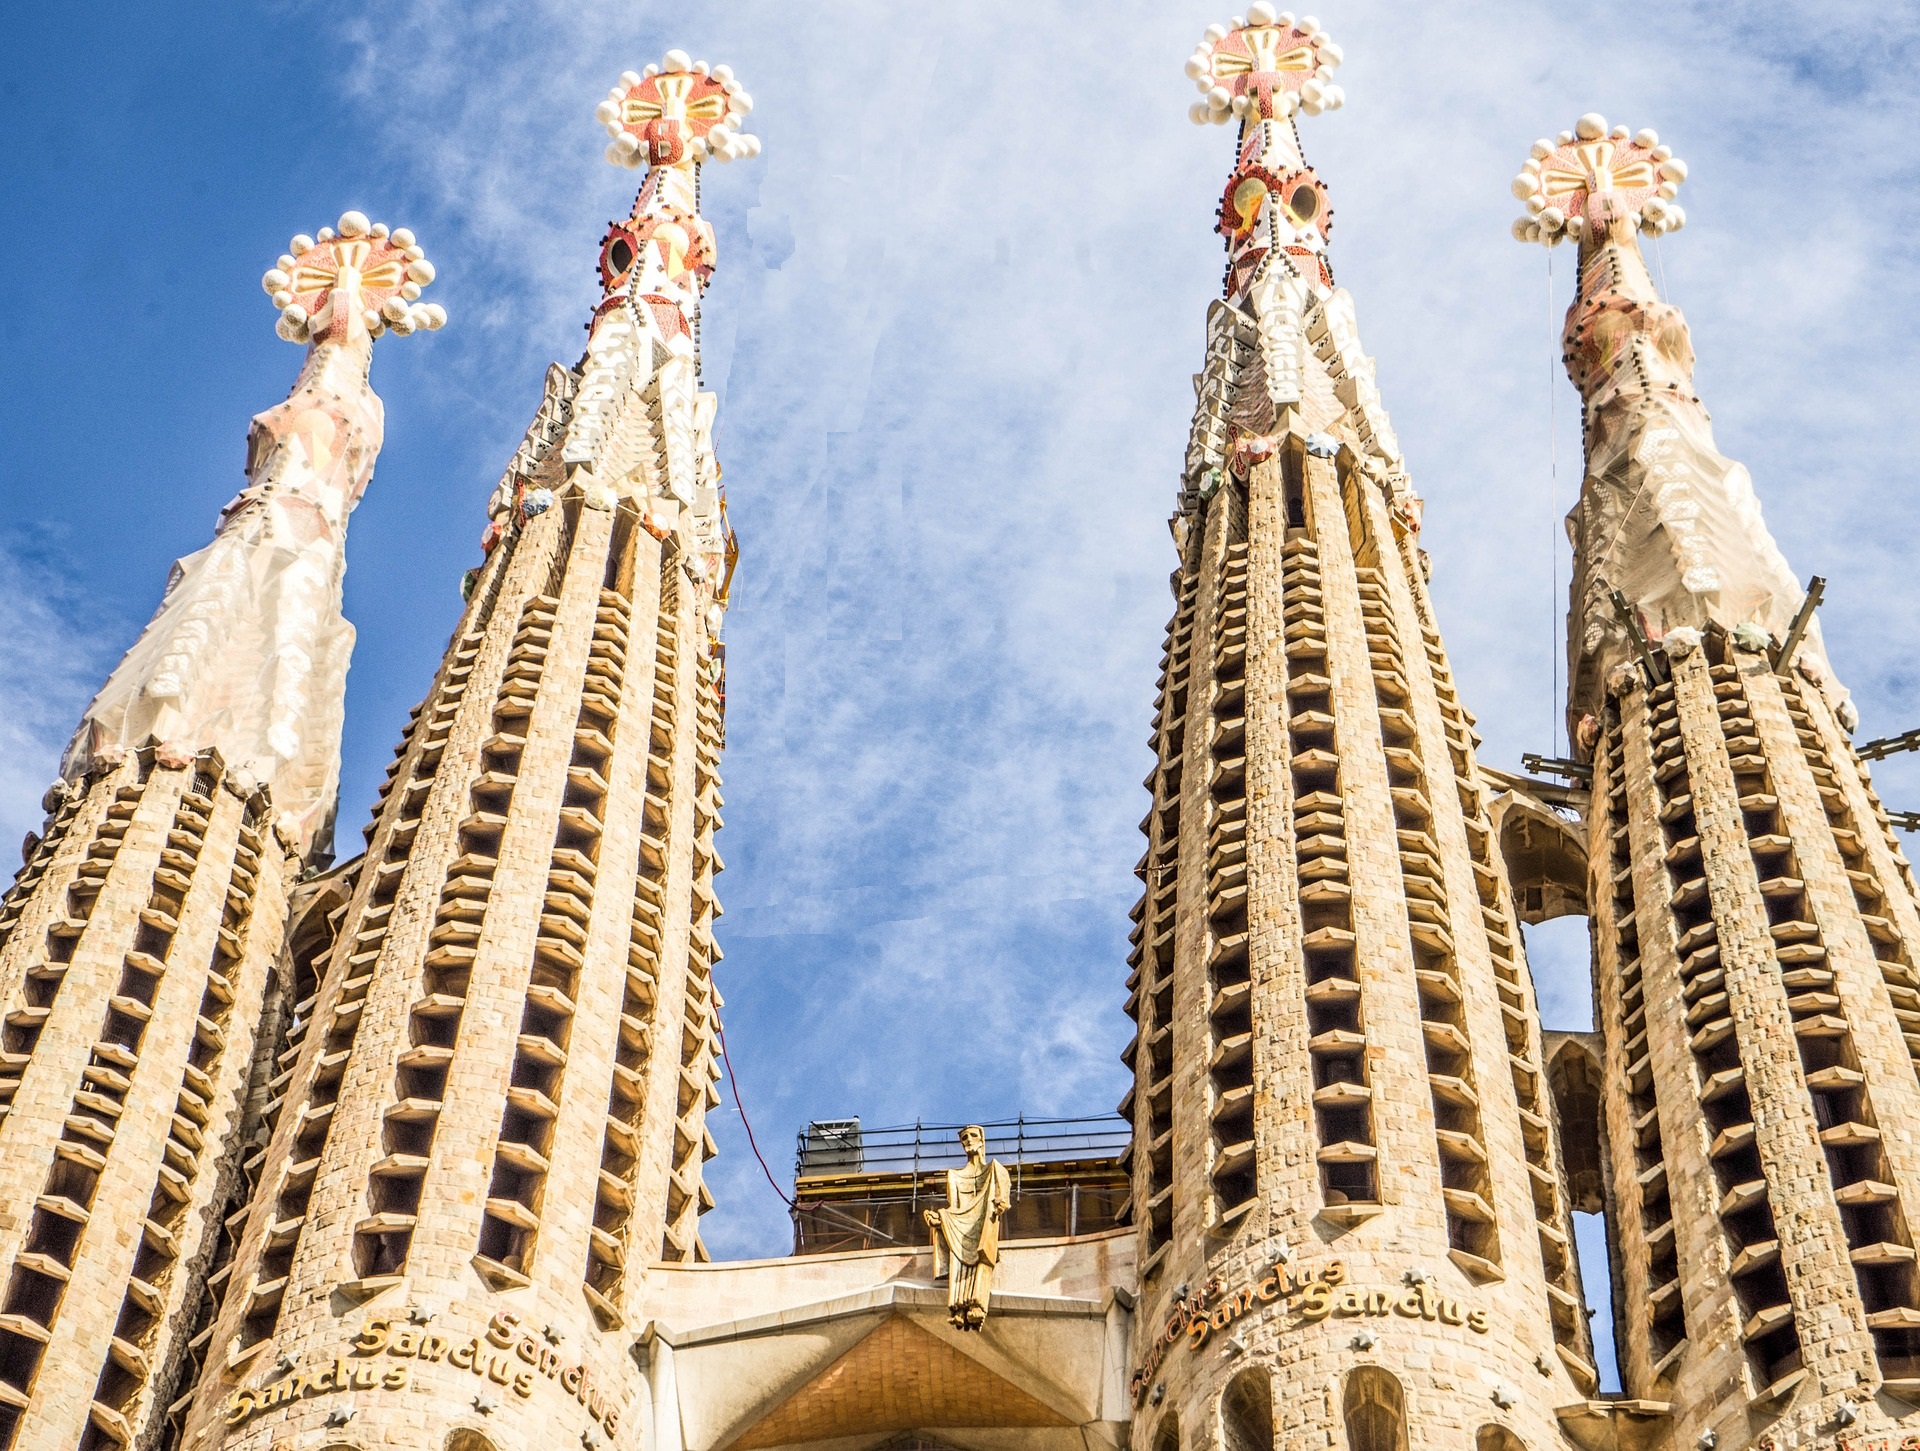 get reservation booking online book tickets visit tours Sagrada Familia Guided Tour sacred holy family barcelona